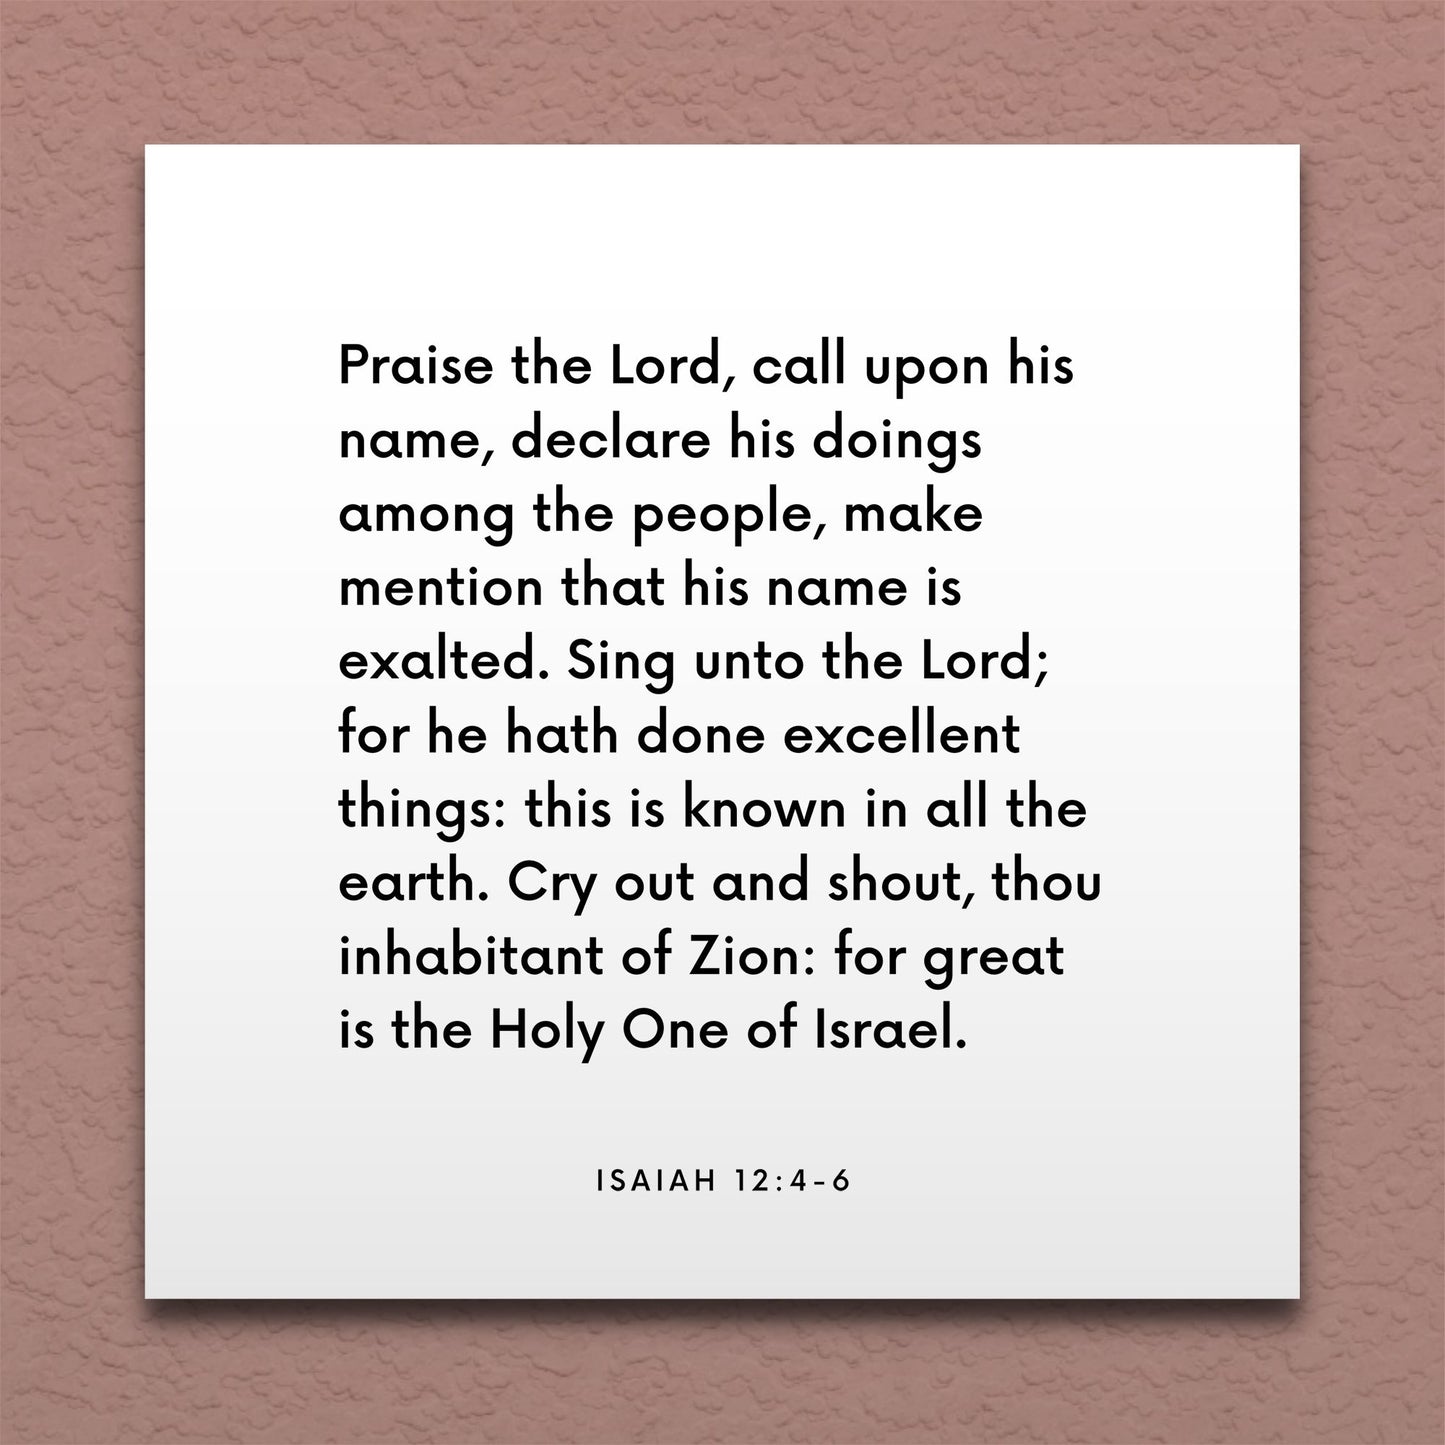 Wall-mounted scripture tile for Isaiah 12:4-6 - "Praise the Lord, call upon his name"